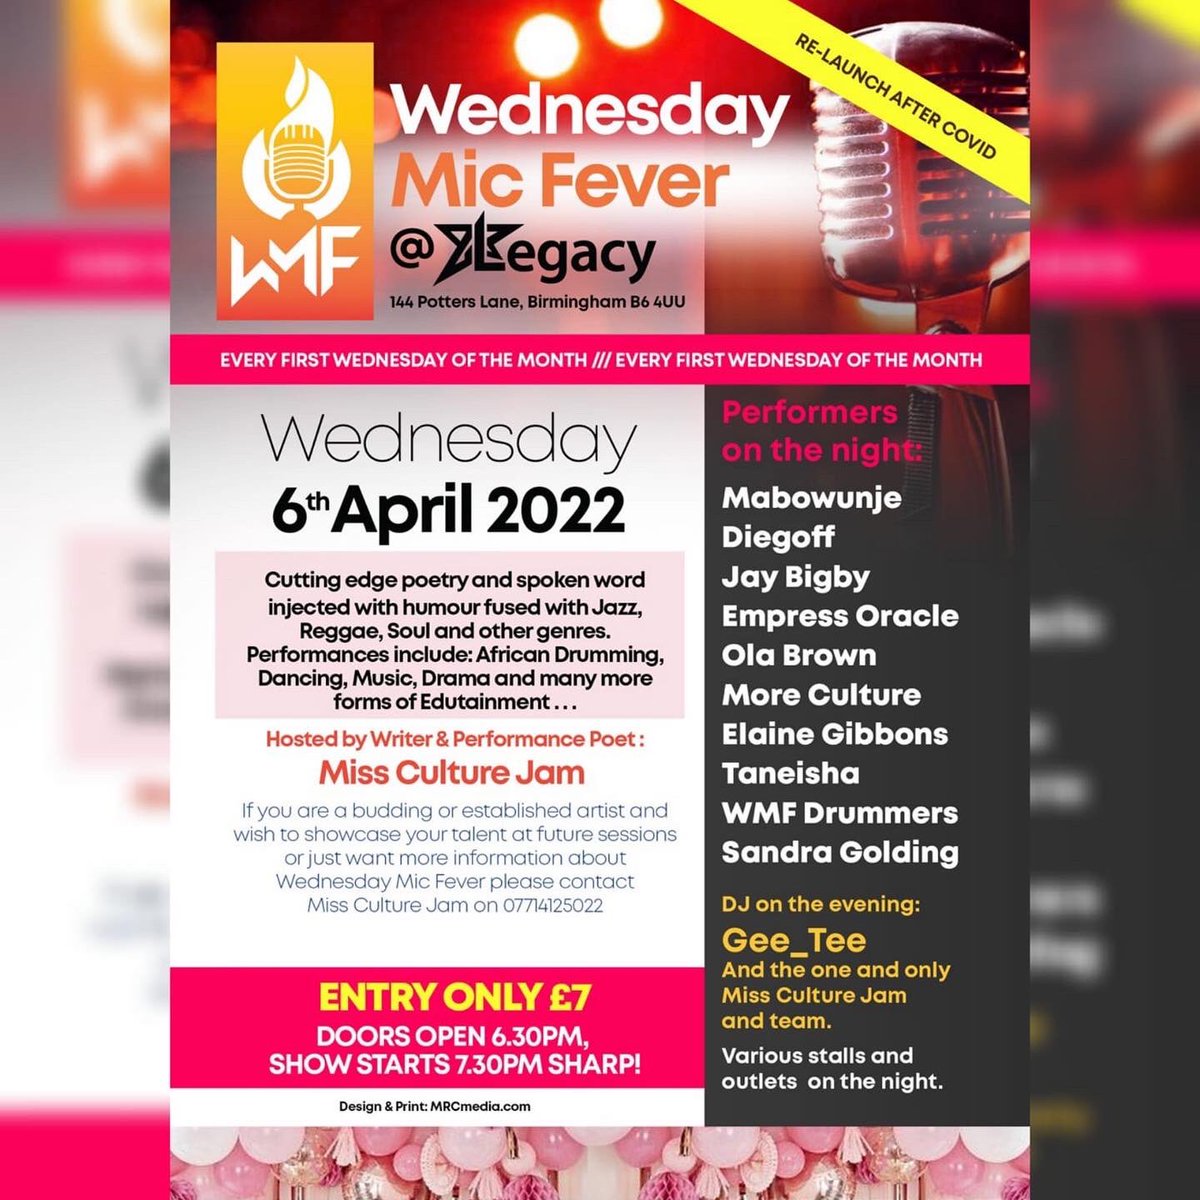 Tomorrow evening at 6:30pm our doors will open for the Wednesday mic fever relaunch!

Tickets are available on the door.

Come along and enjoy Birmingham’s very own talents! You won’t want to miss it.

#wednesdaymicfever #talent #birminghamuk #thingstodoinbirmingham #legacycoe